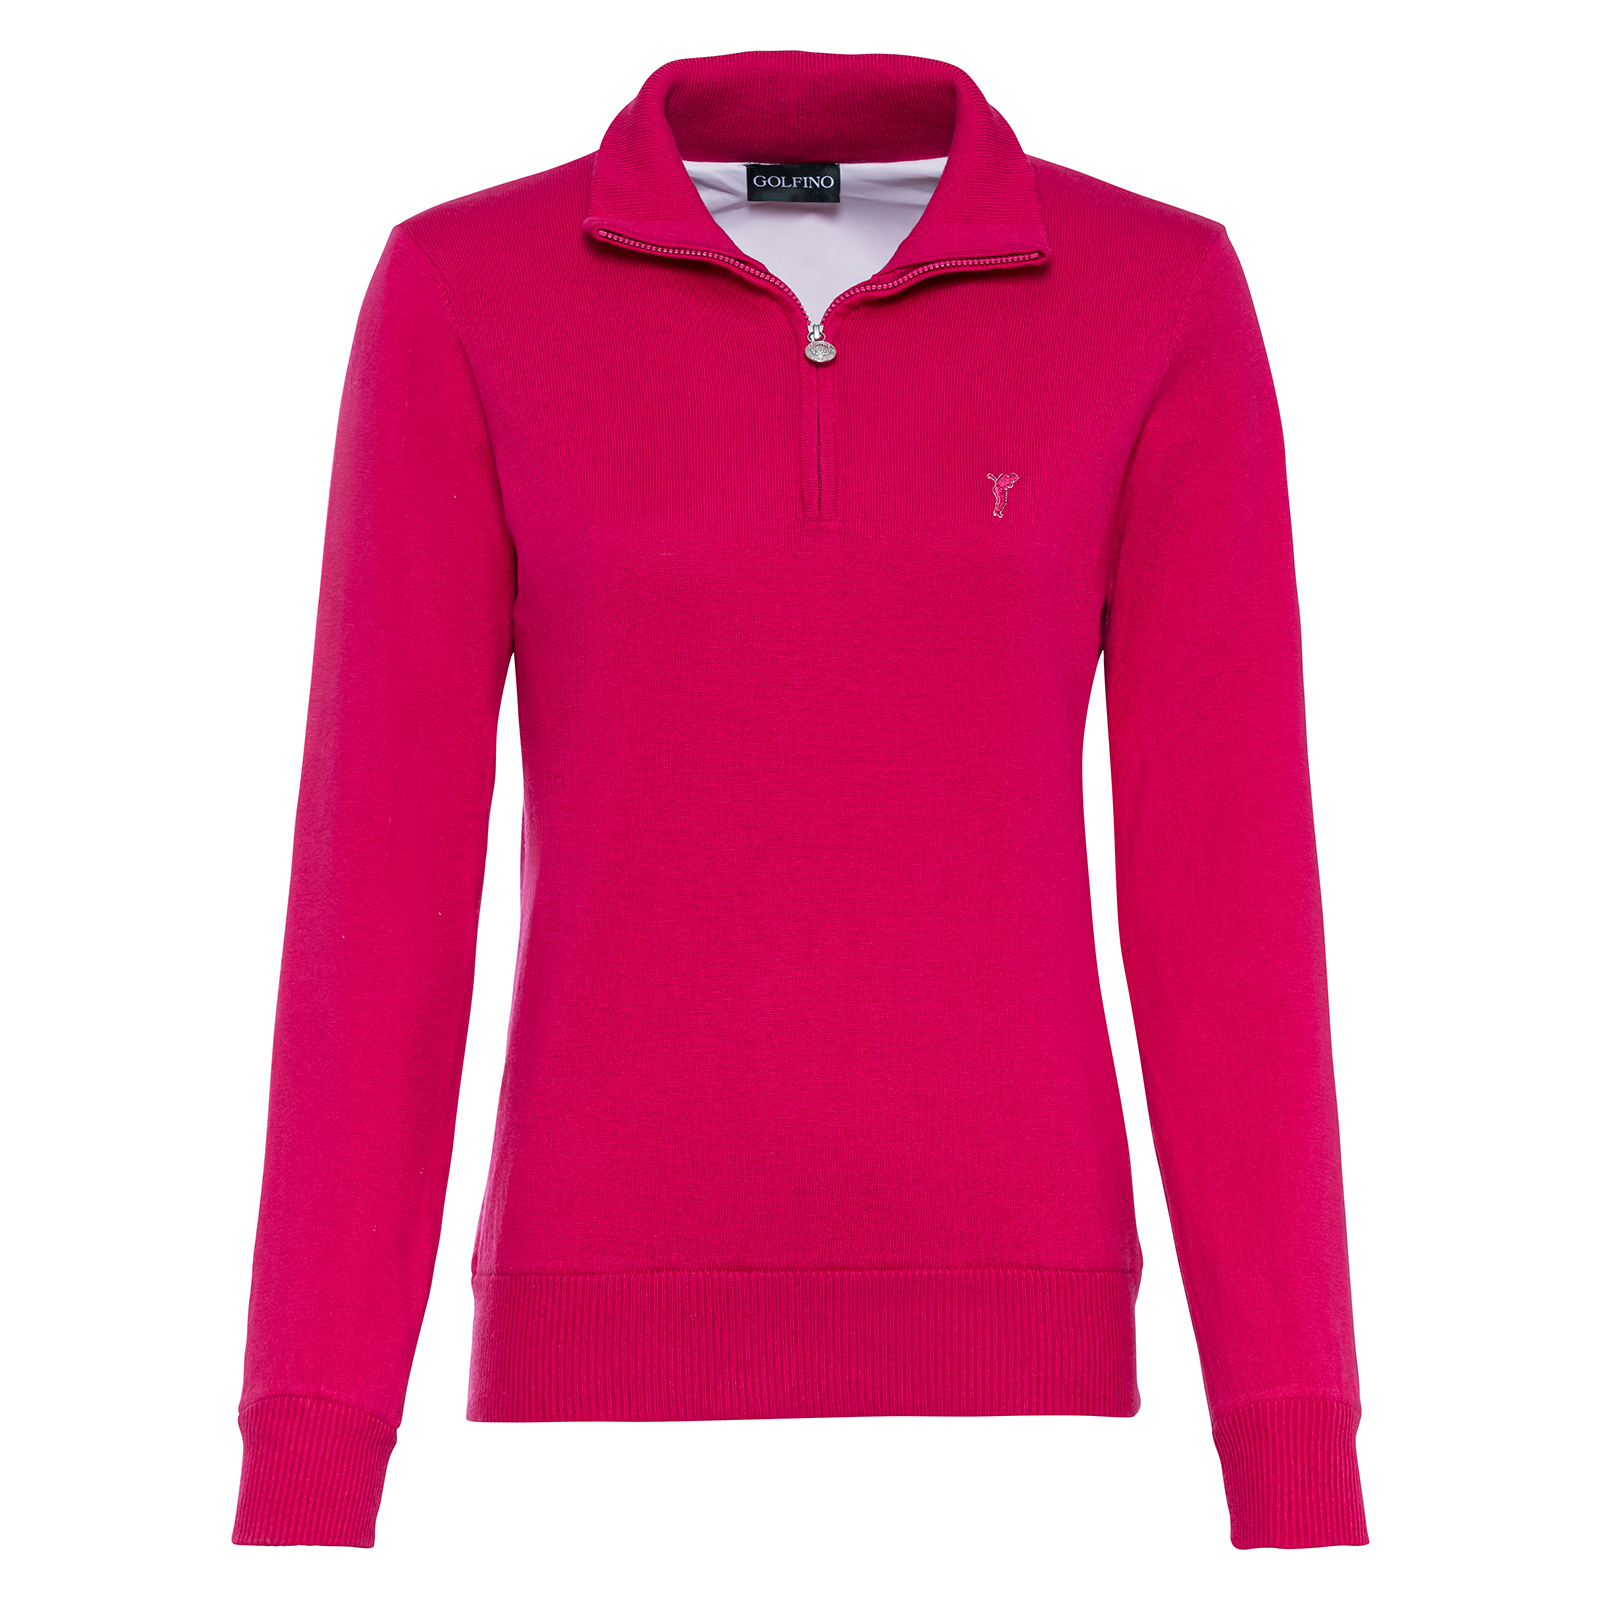 Ladies' sweater made of breathable knitted windstopper fabric 